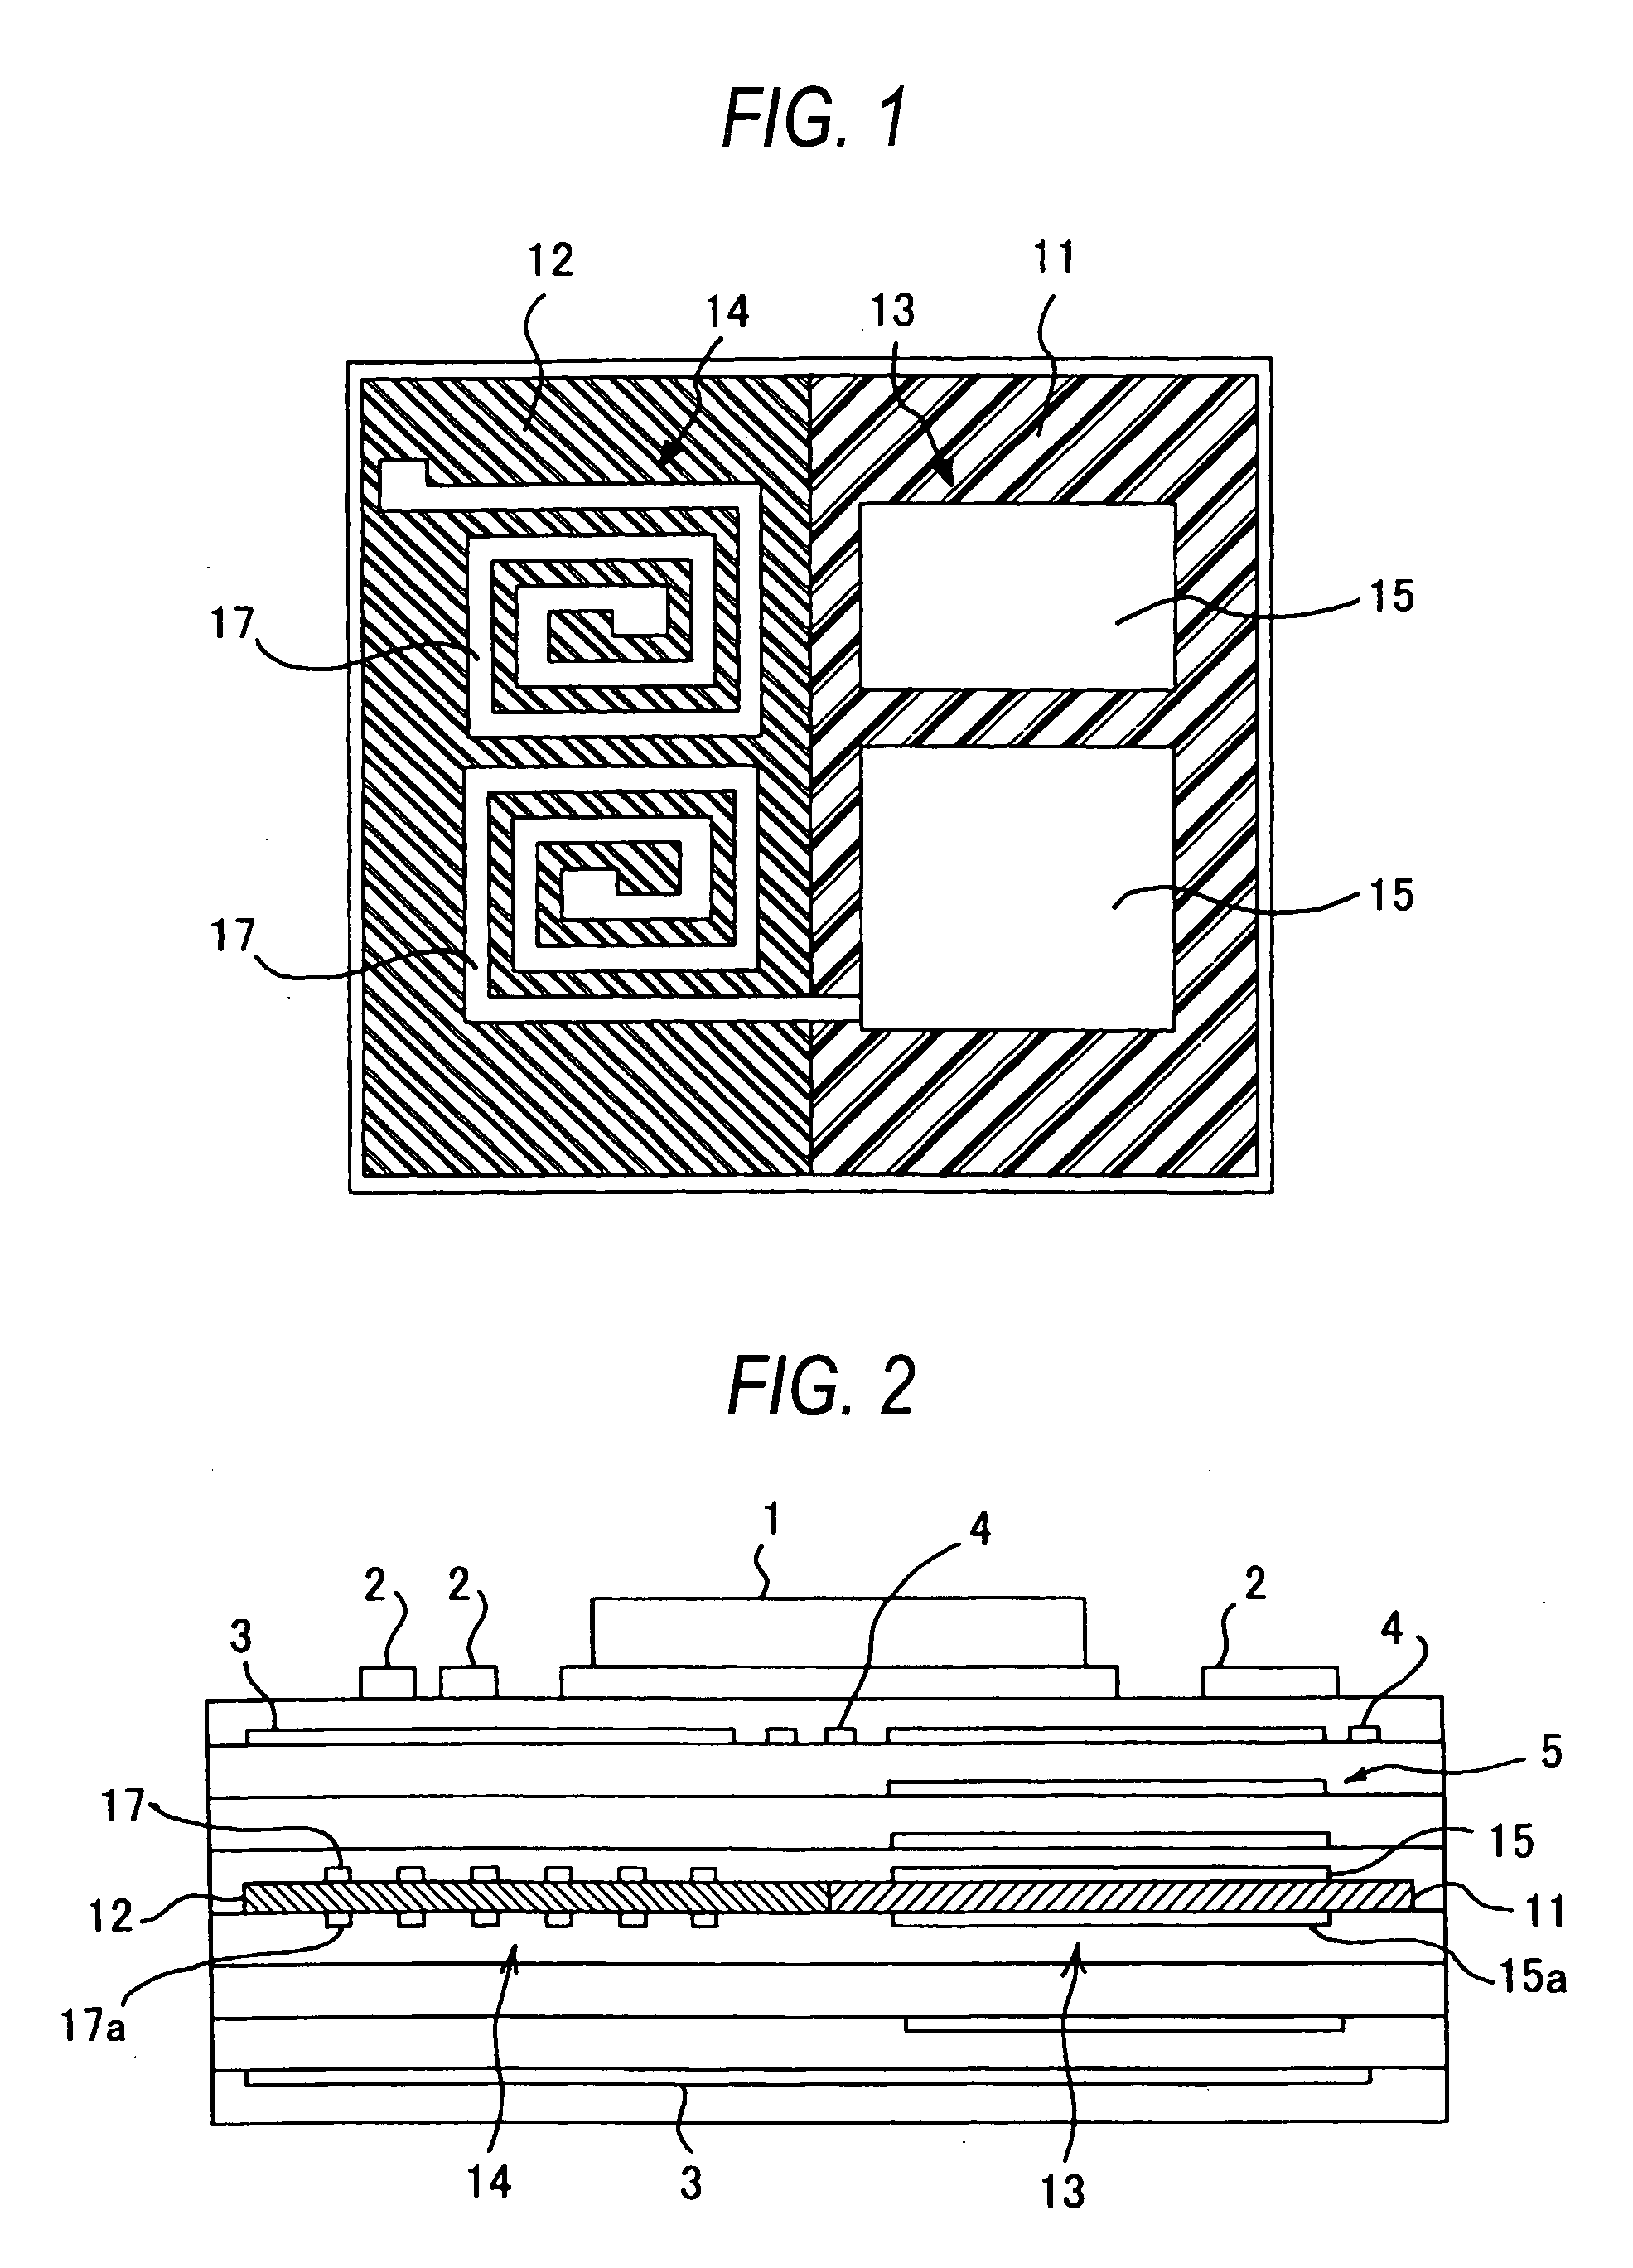 Multilayer substrate and method for producing same